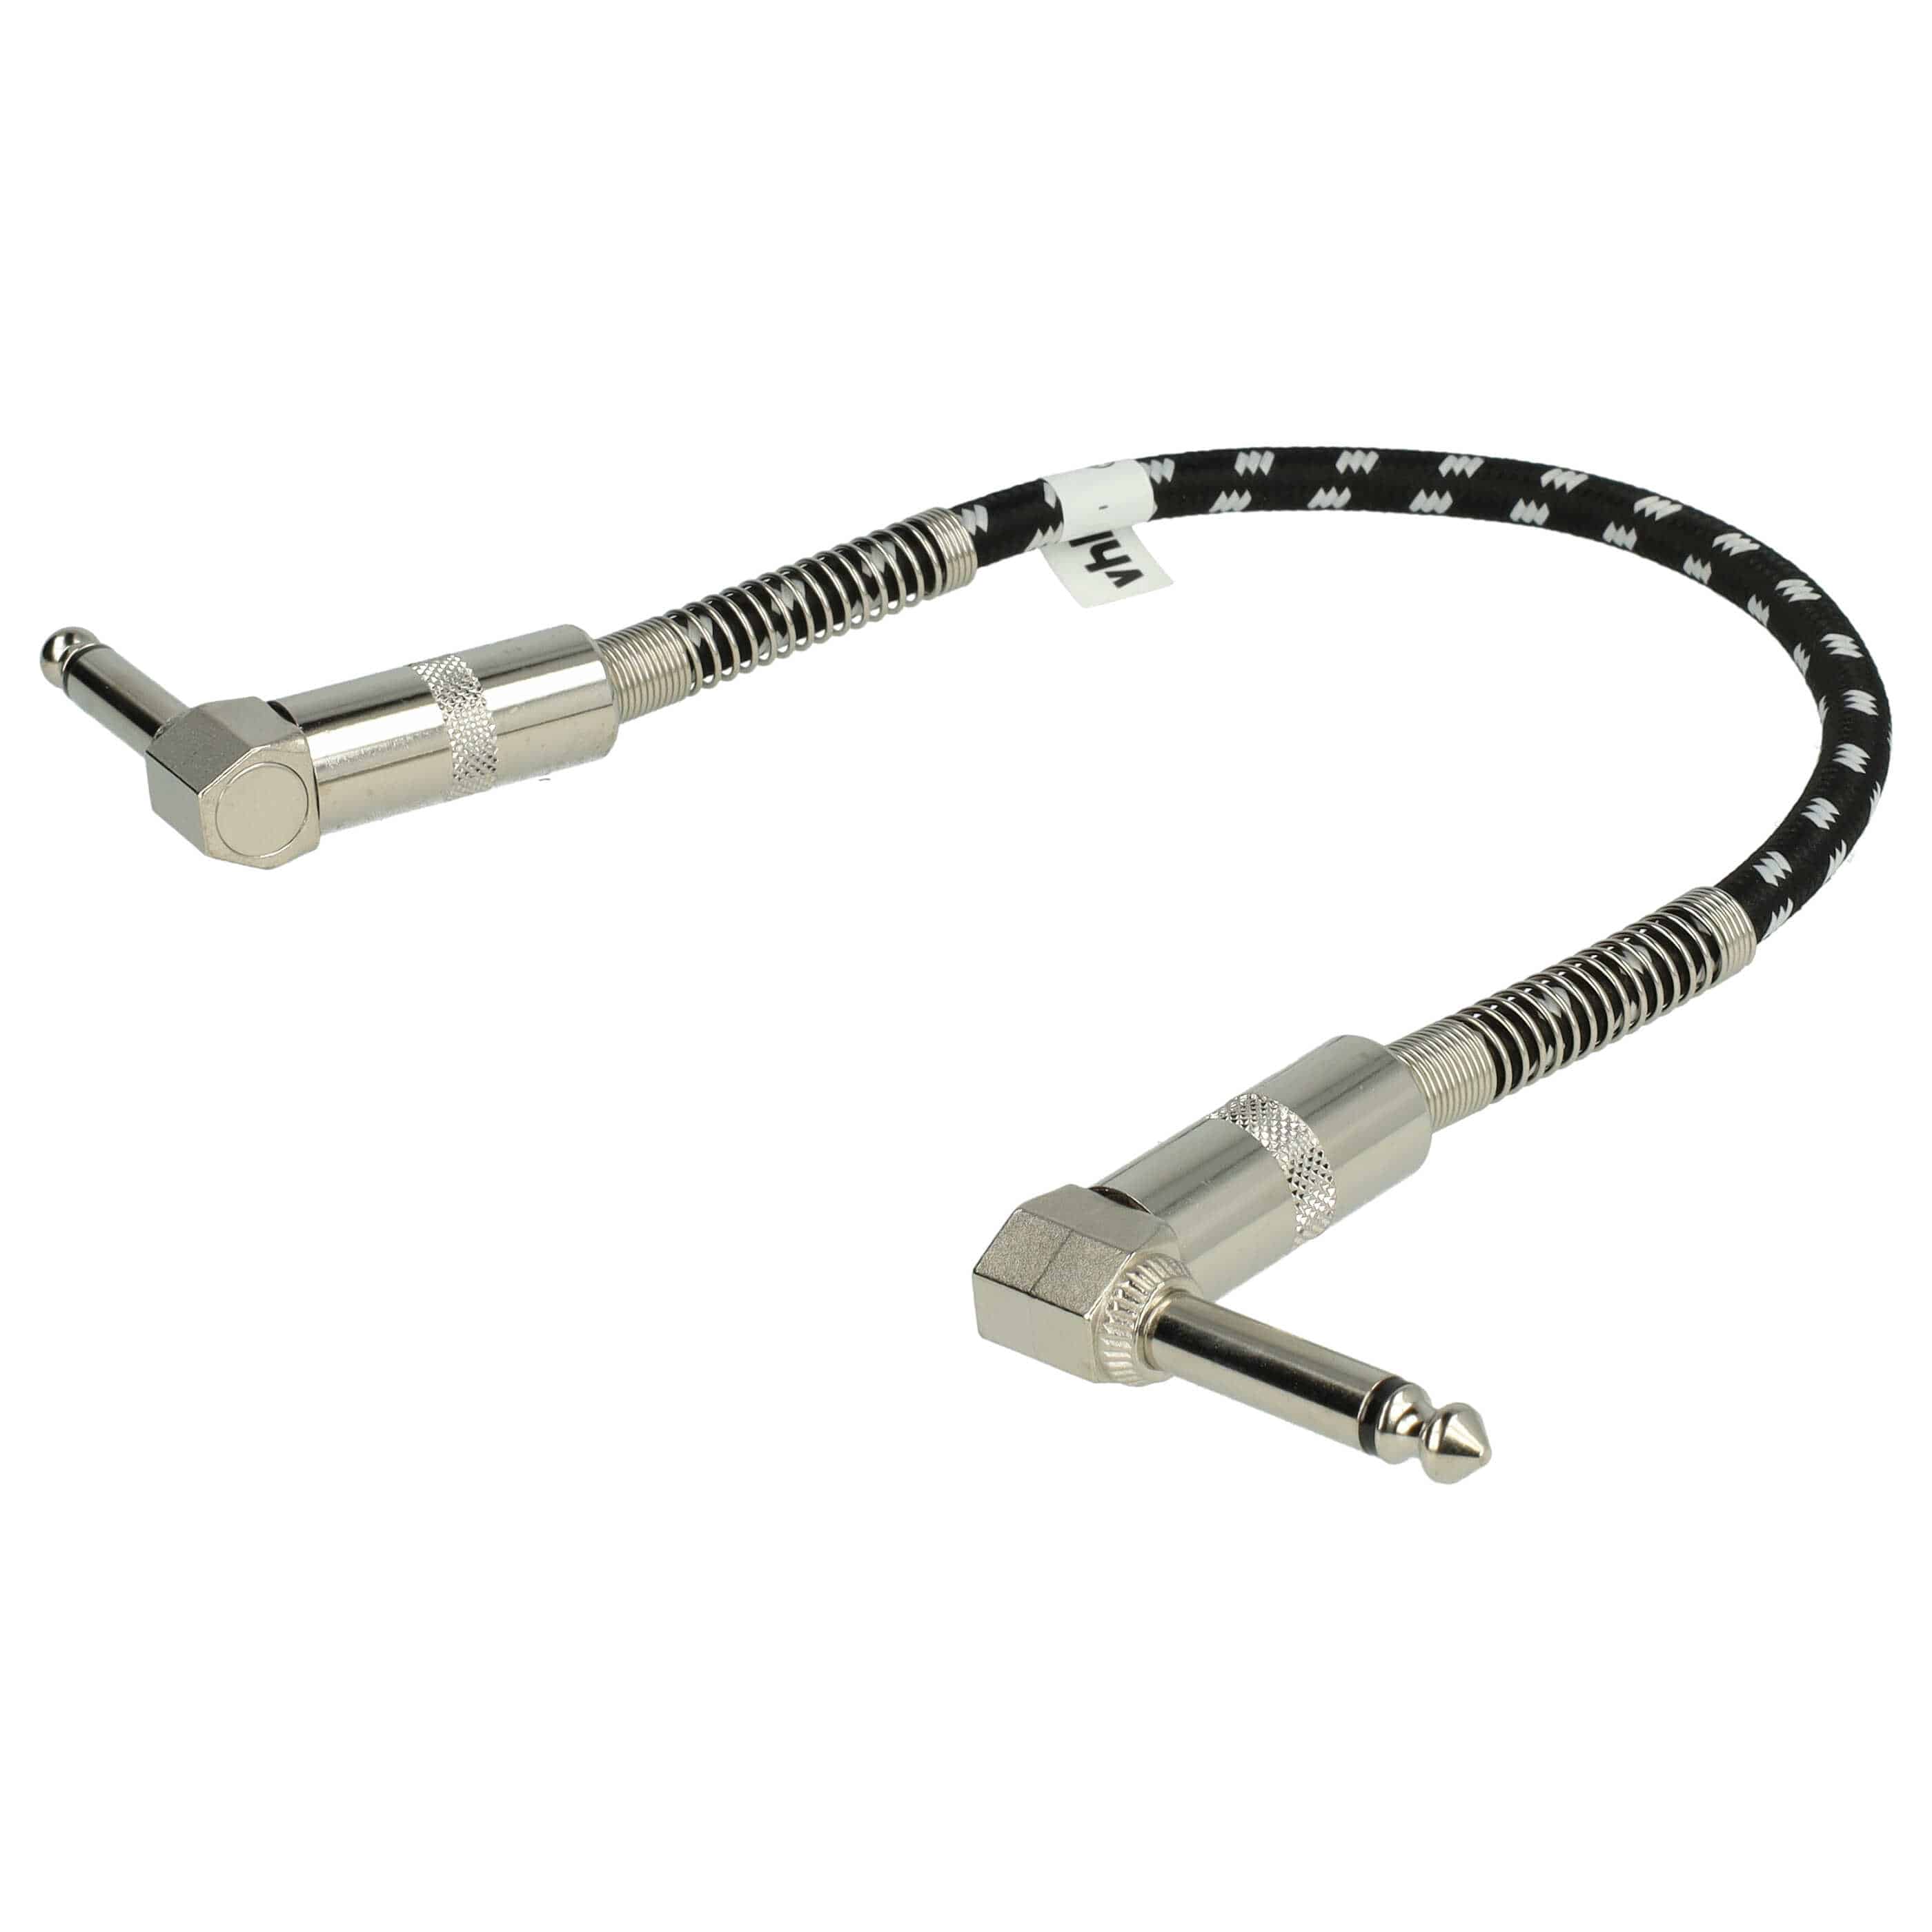 Guitar Patch Cable 30cm Jack Cable for Pedal Board - Patch Cord with 6.3mm Jack Plug, Right Angle, Braided, wh